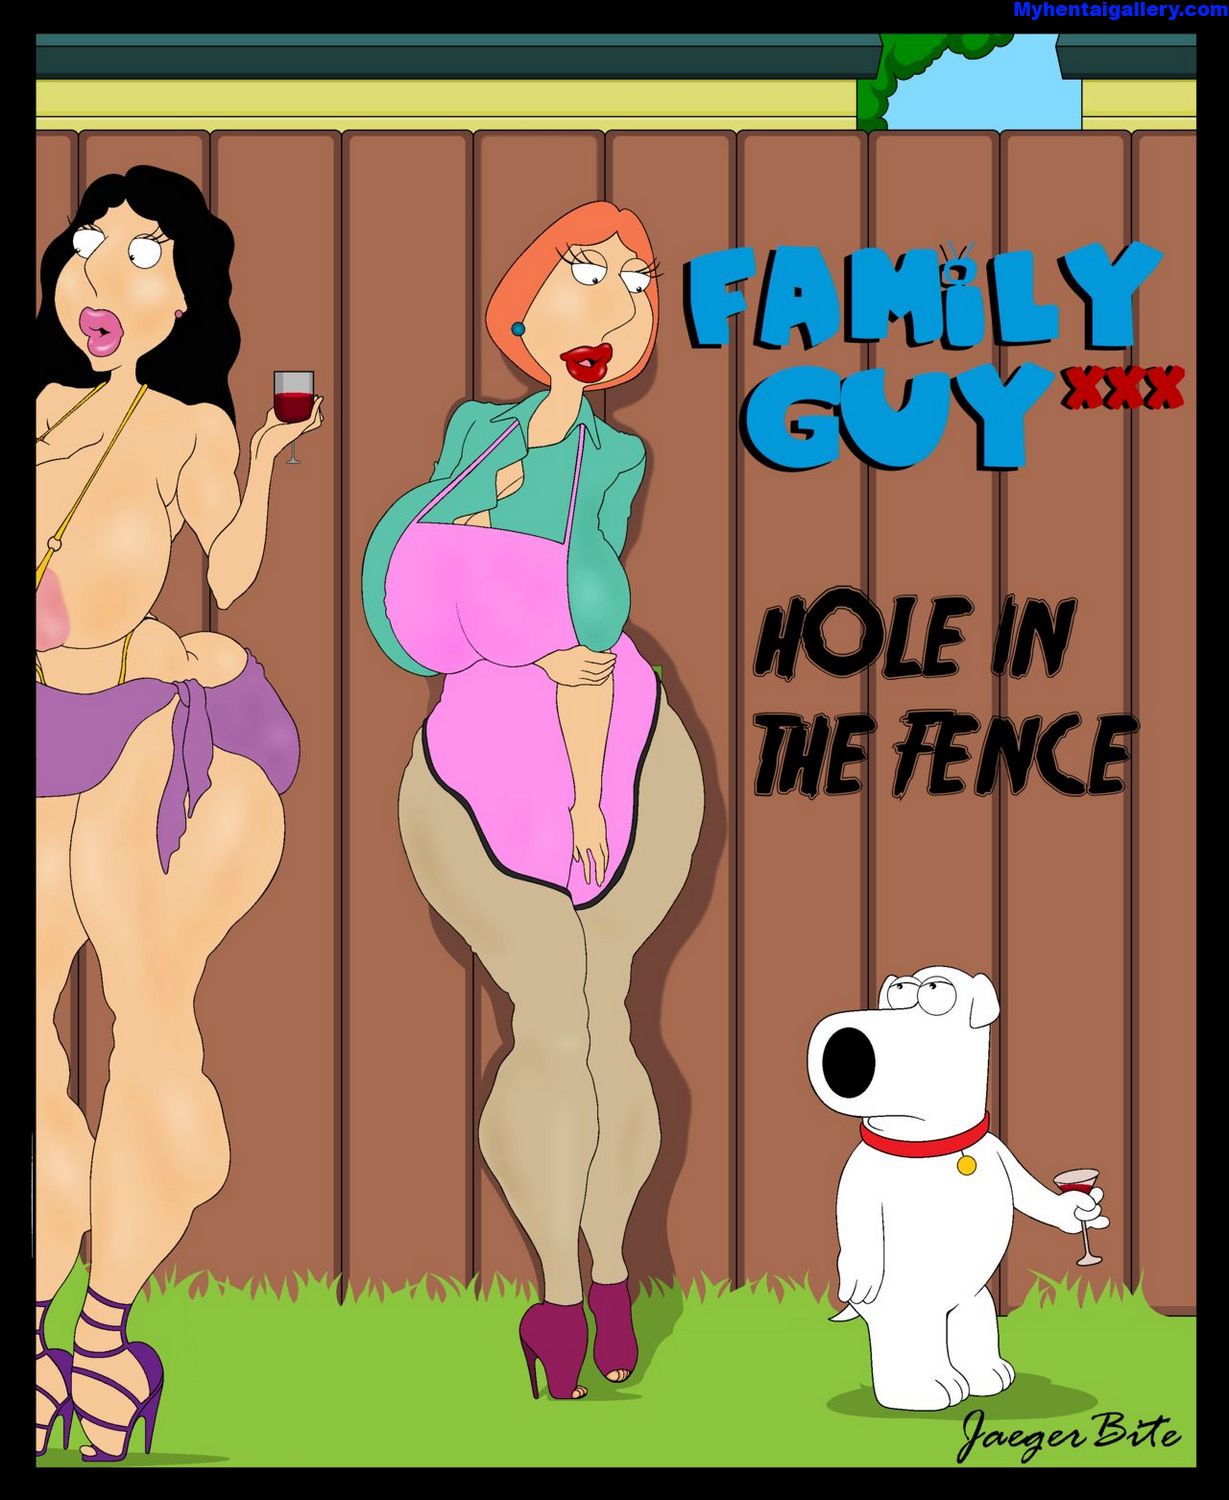 Family Guy Xxx Comic - Family Guy XXX - Hole In The Fence - MyHentaiGallery Free Porn Comics and  Sex Cartoons